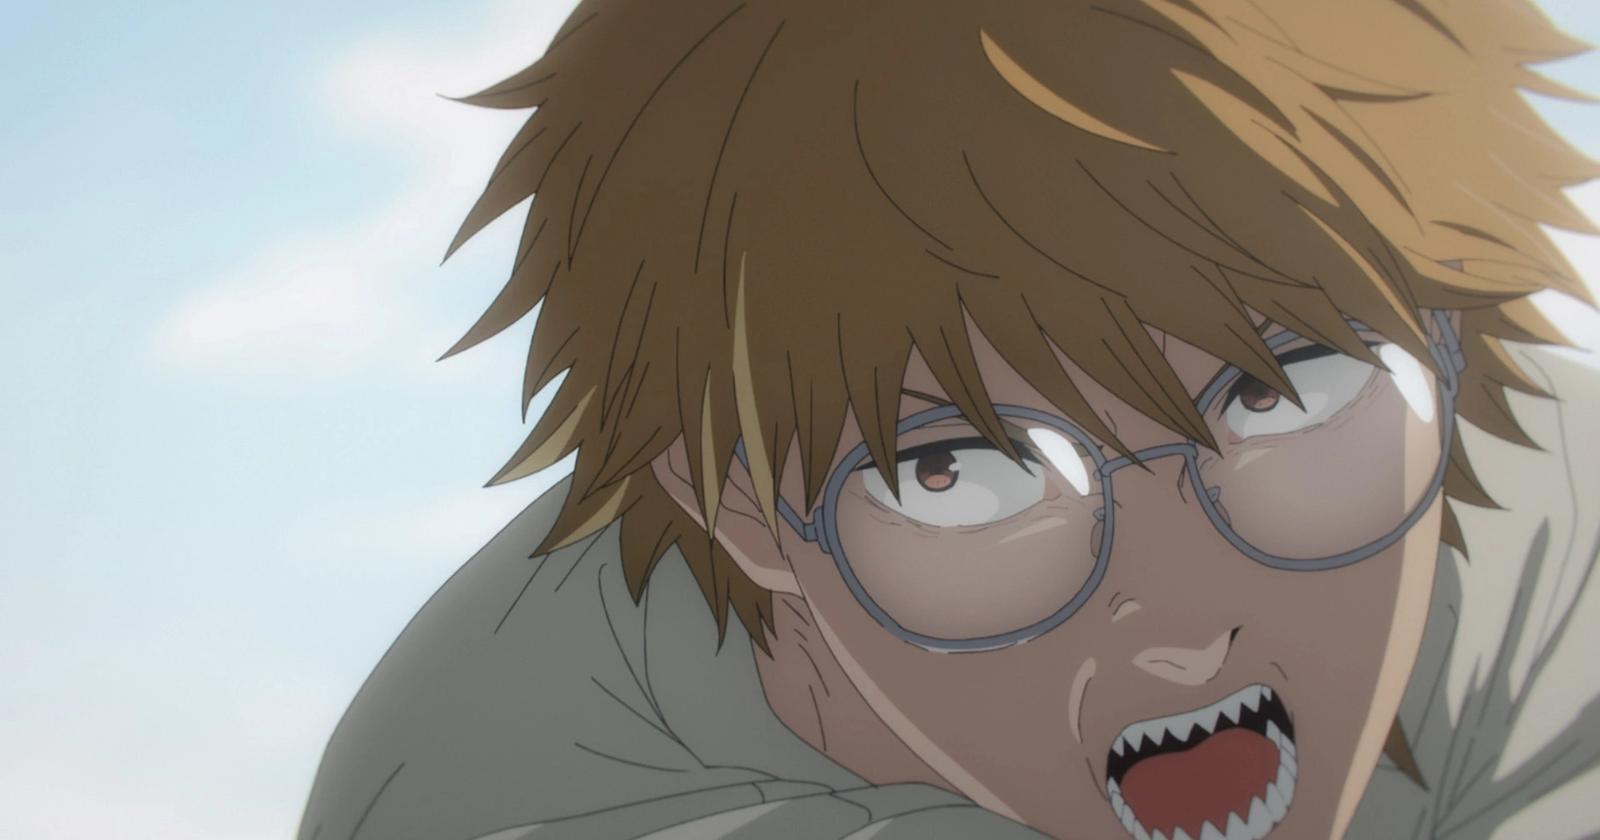 Chainsaw Man': 3 Burning Questions We Have After the Anime's Premiere